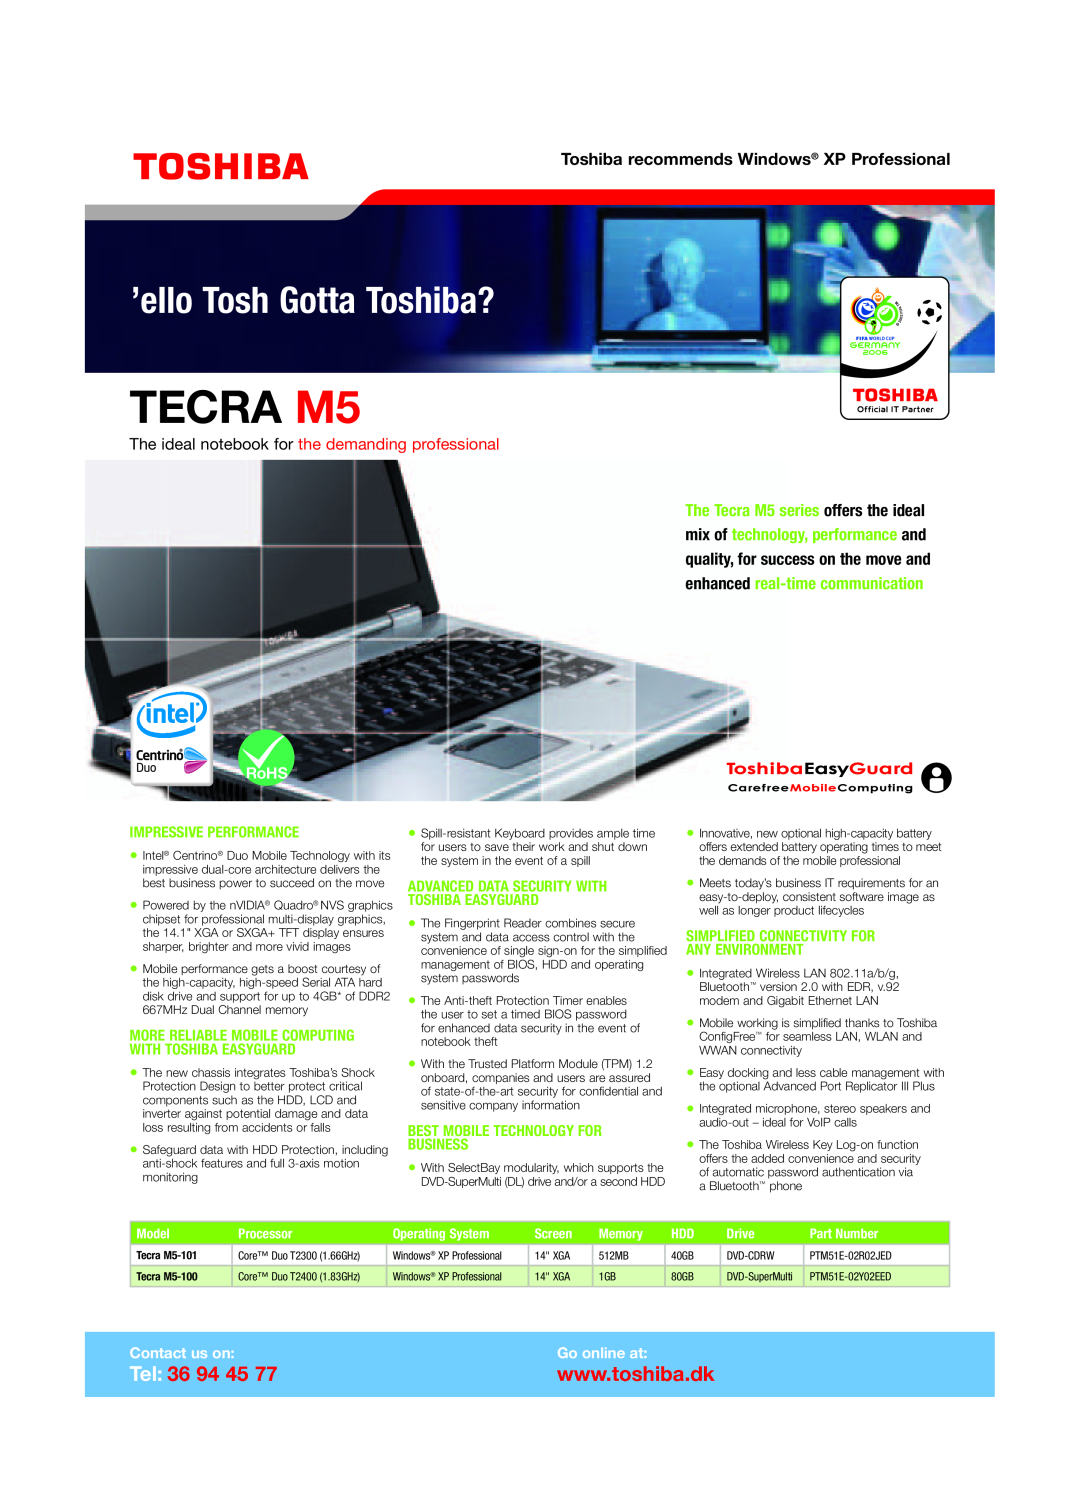 Toshiba TECRA M5 manual Toshiba recommends Windows XP Professional, The ideal notebook for the demanding professional 